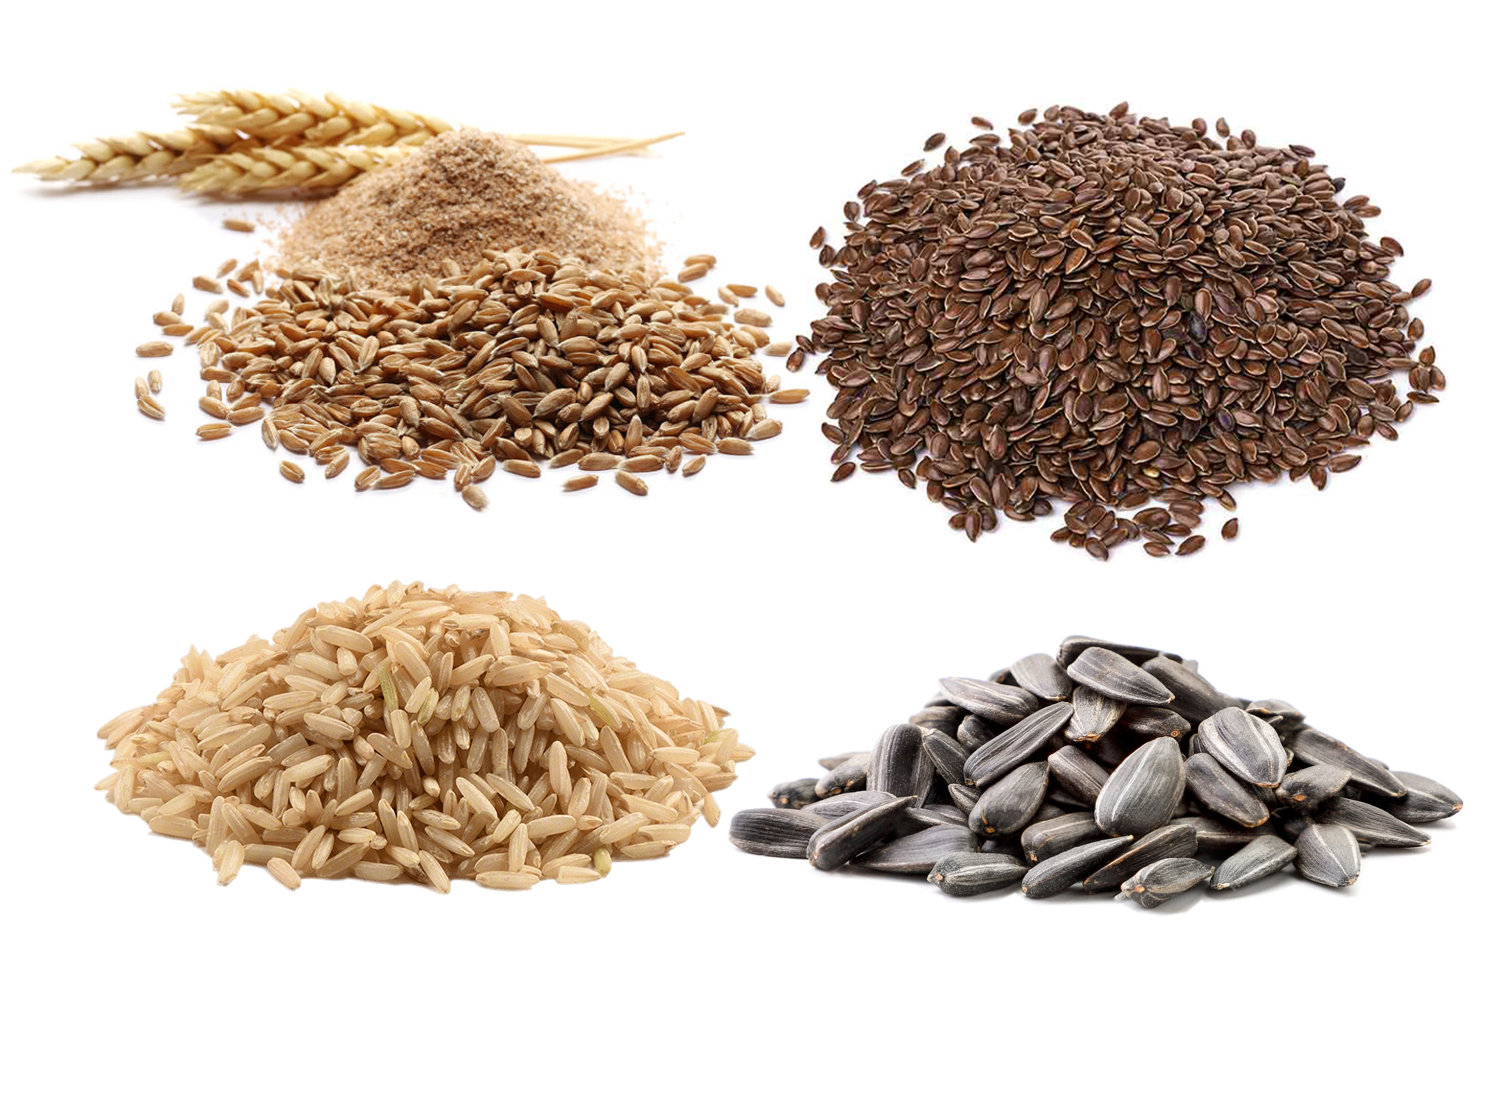 Seeds and Grains